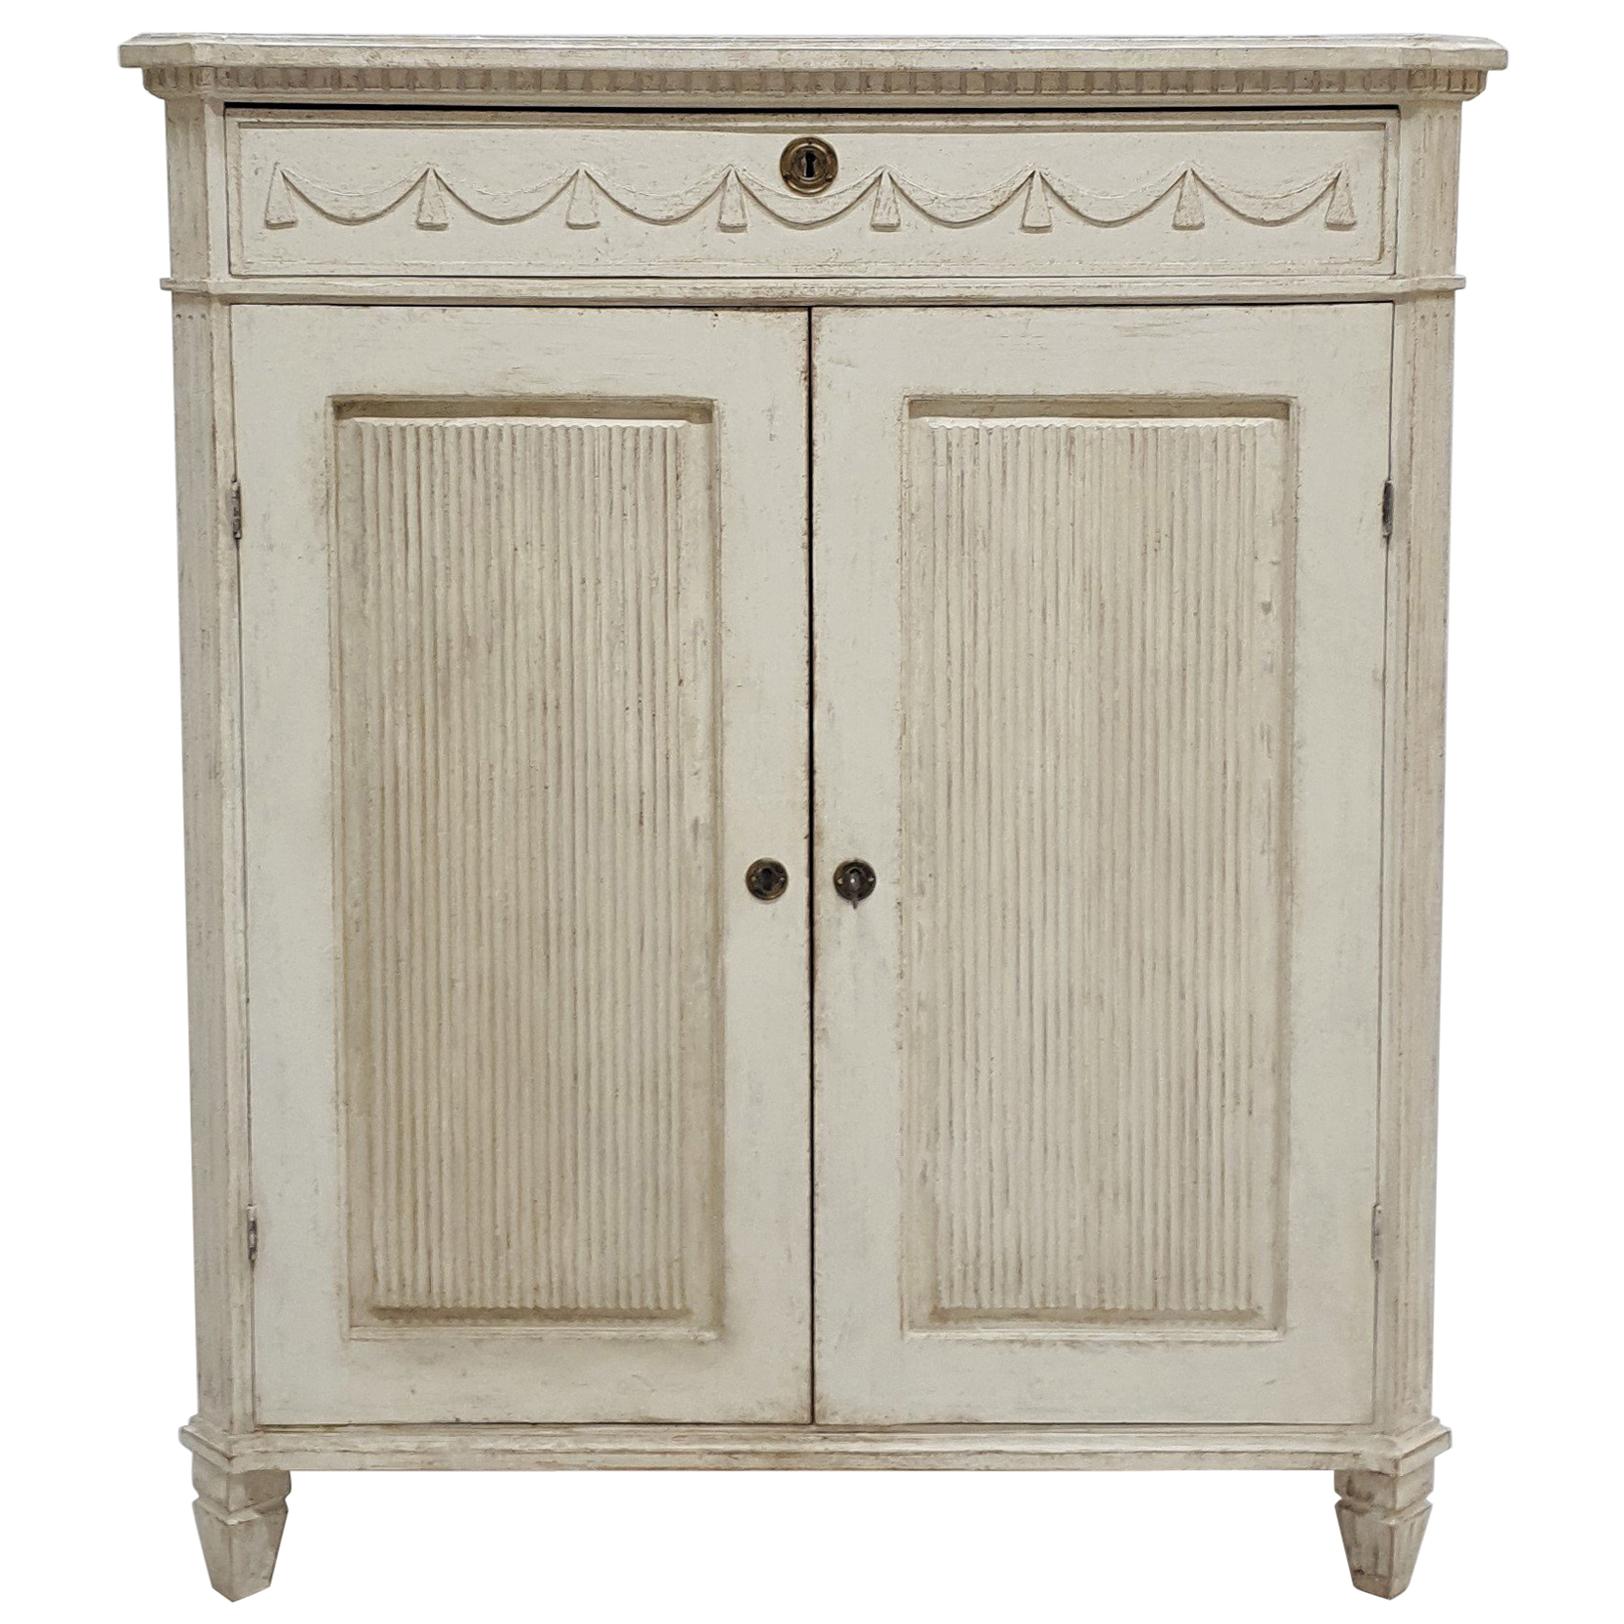 Antique Gustavian Style Sideboard, Mid-19th Century For Sale